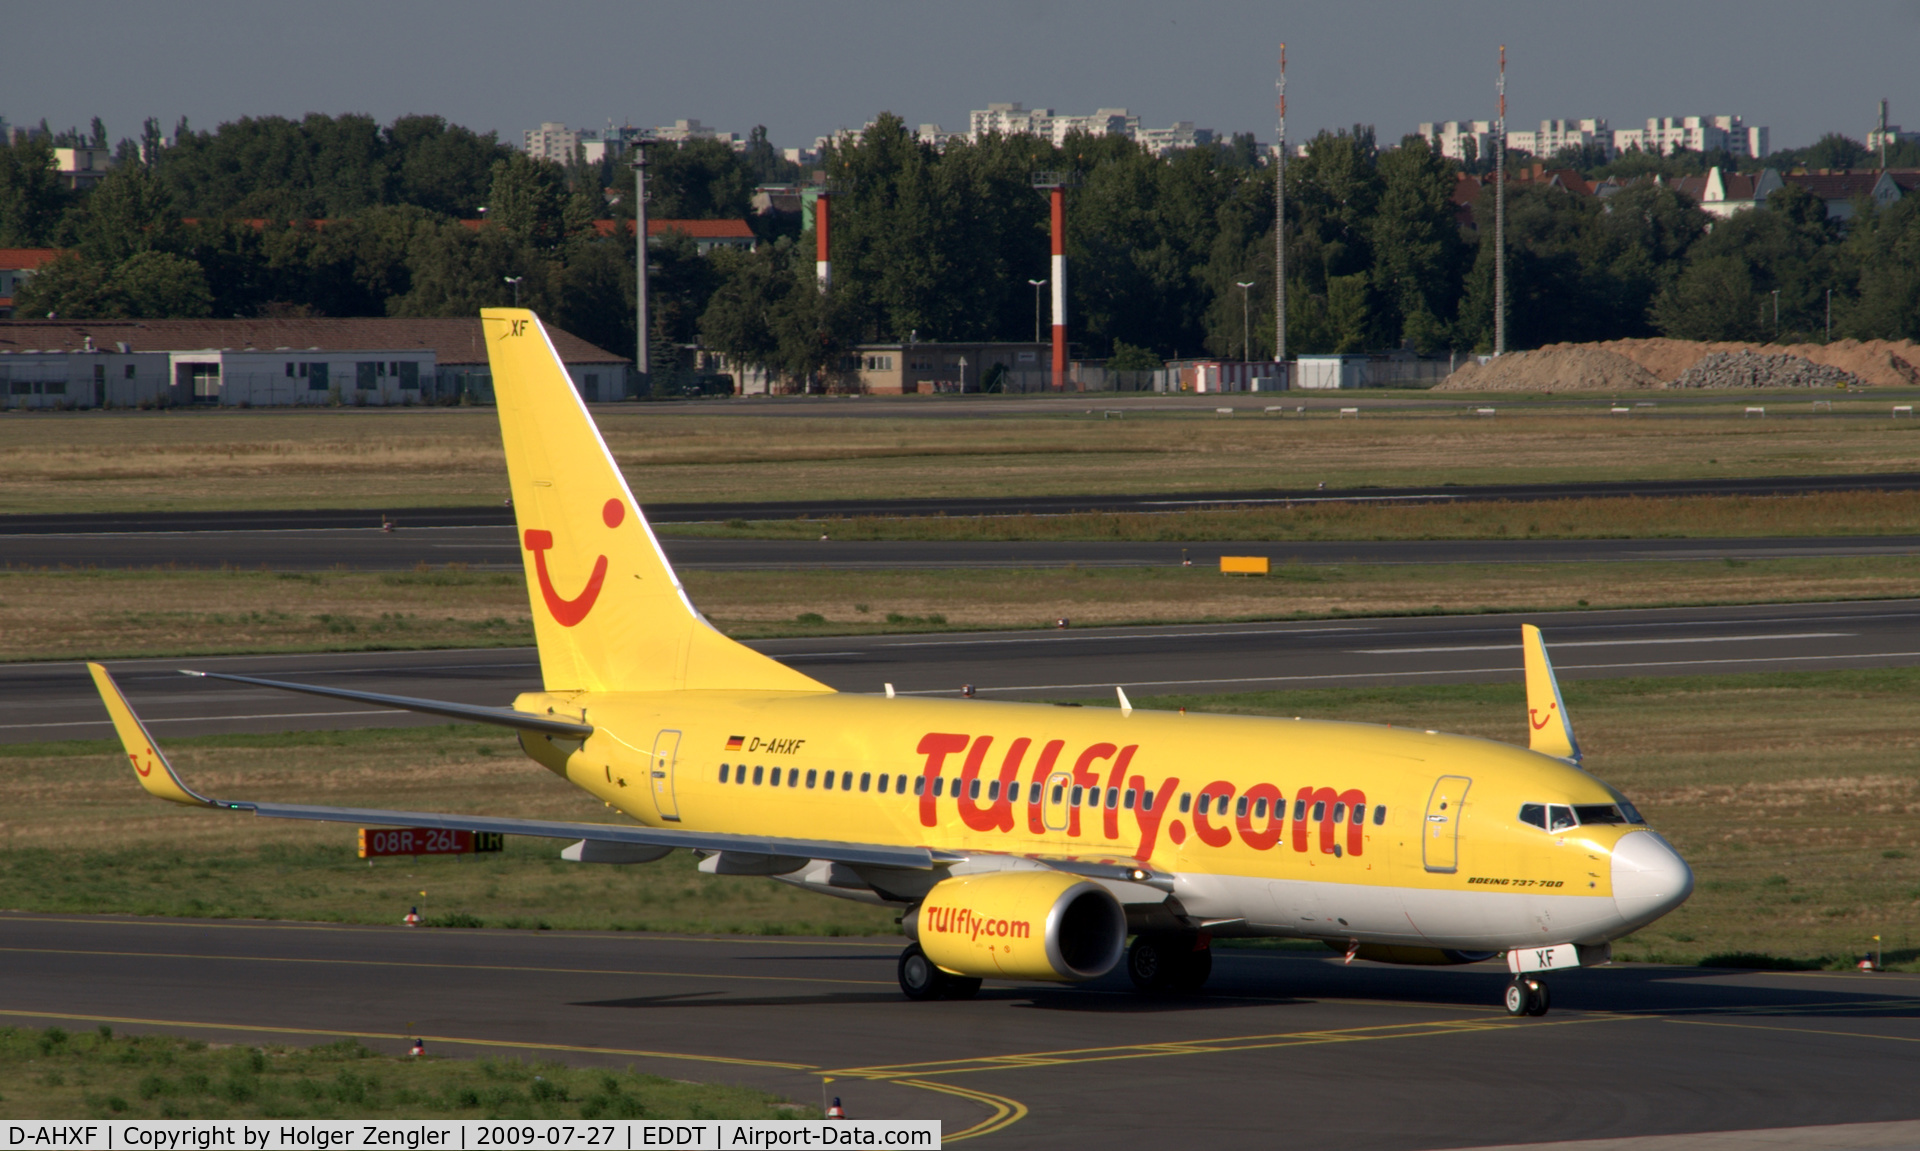 D-AHXF, 2007 Boeing 737-7K5 C/N 35136, TUIfly Boeing 737-7K5 arriving from Cologne